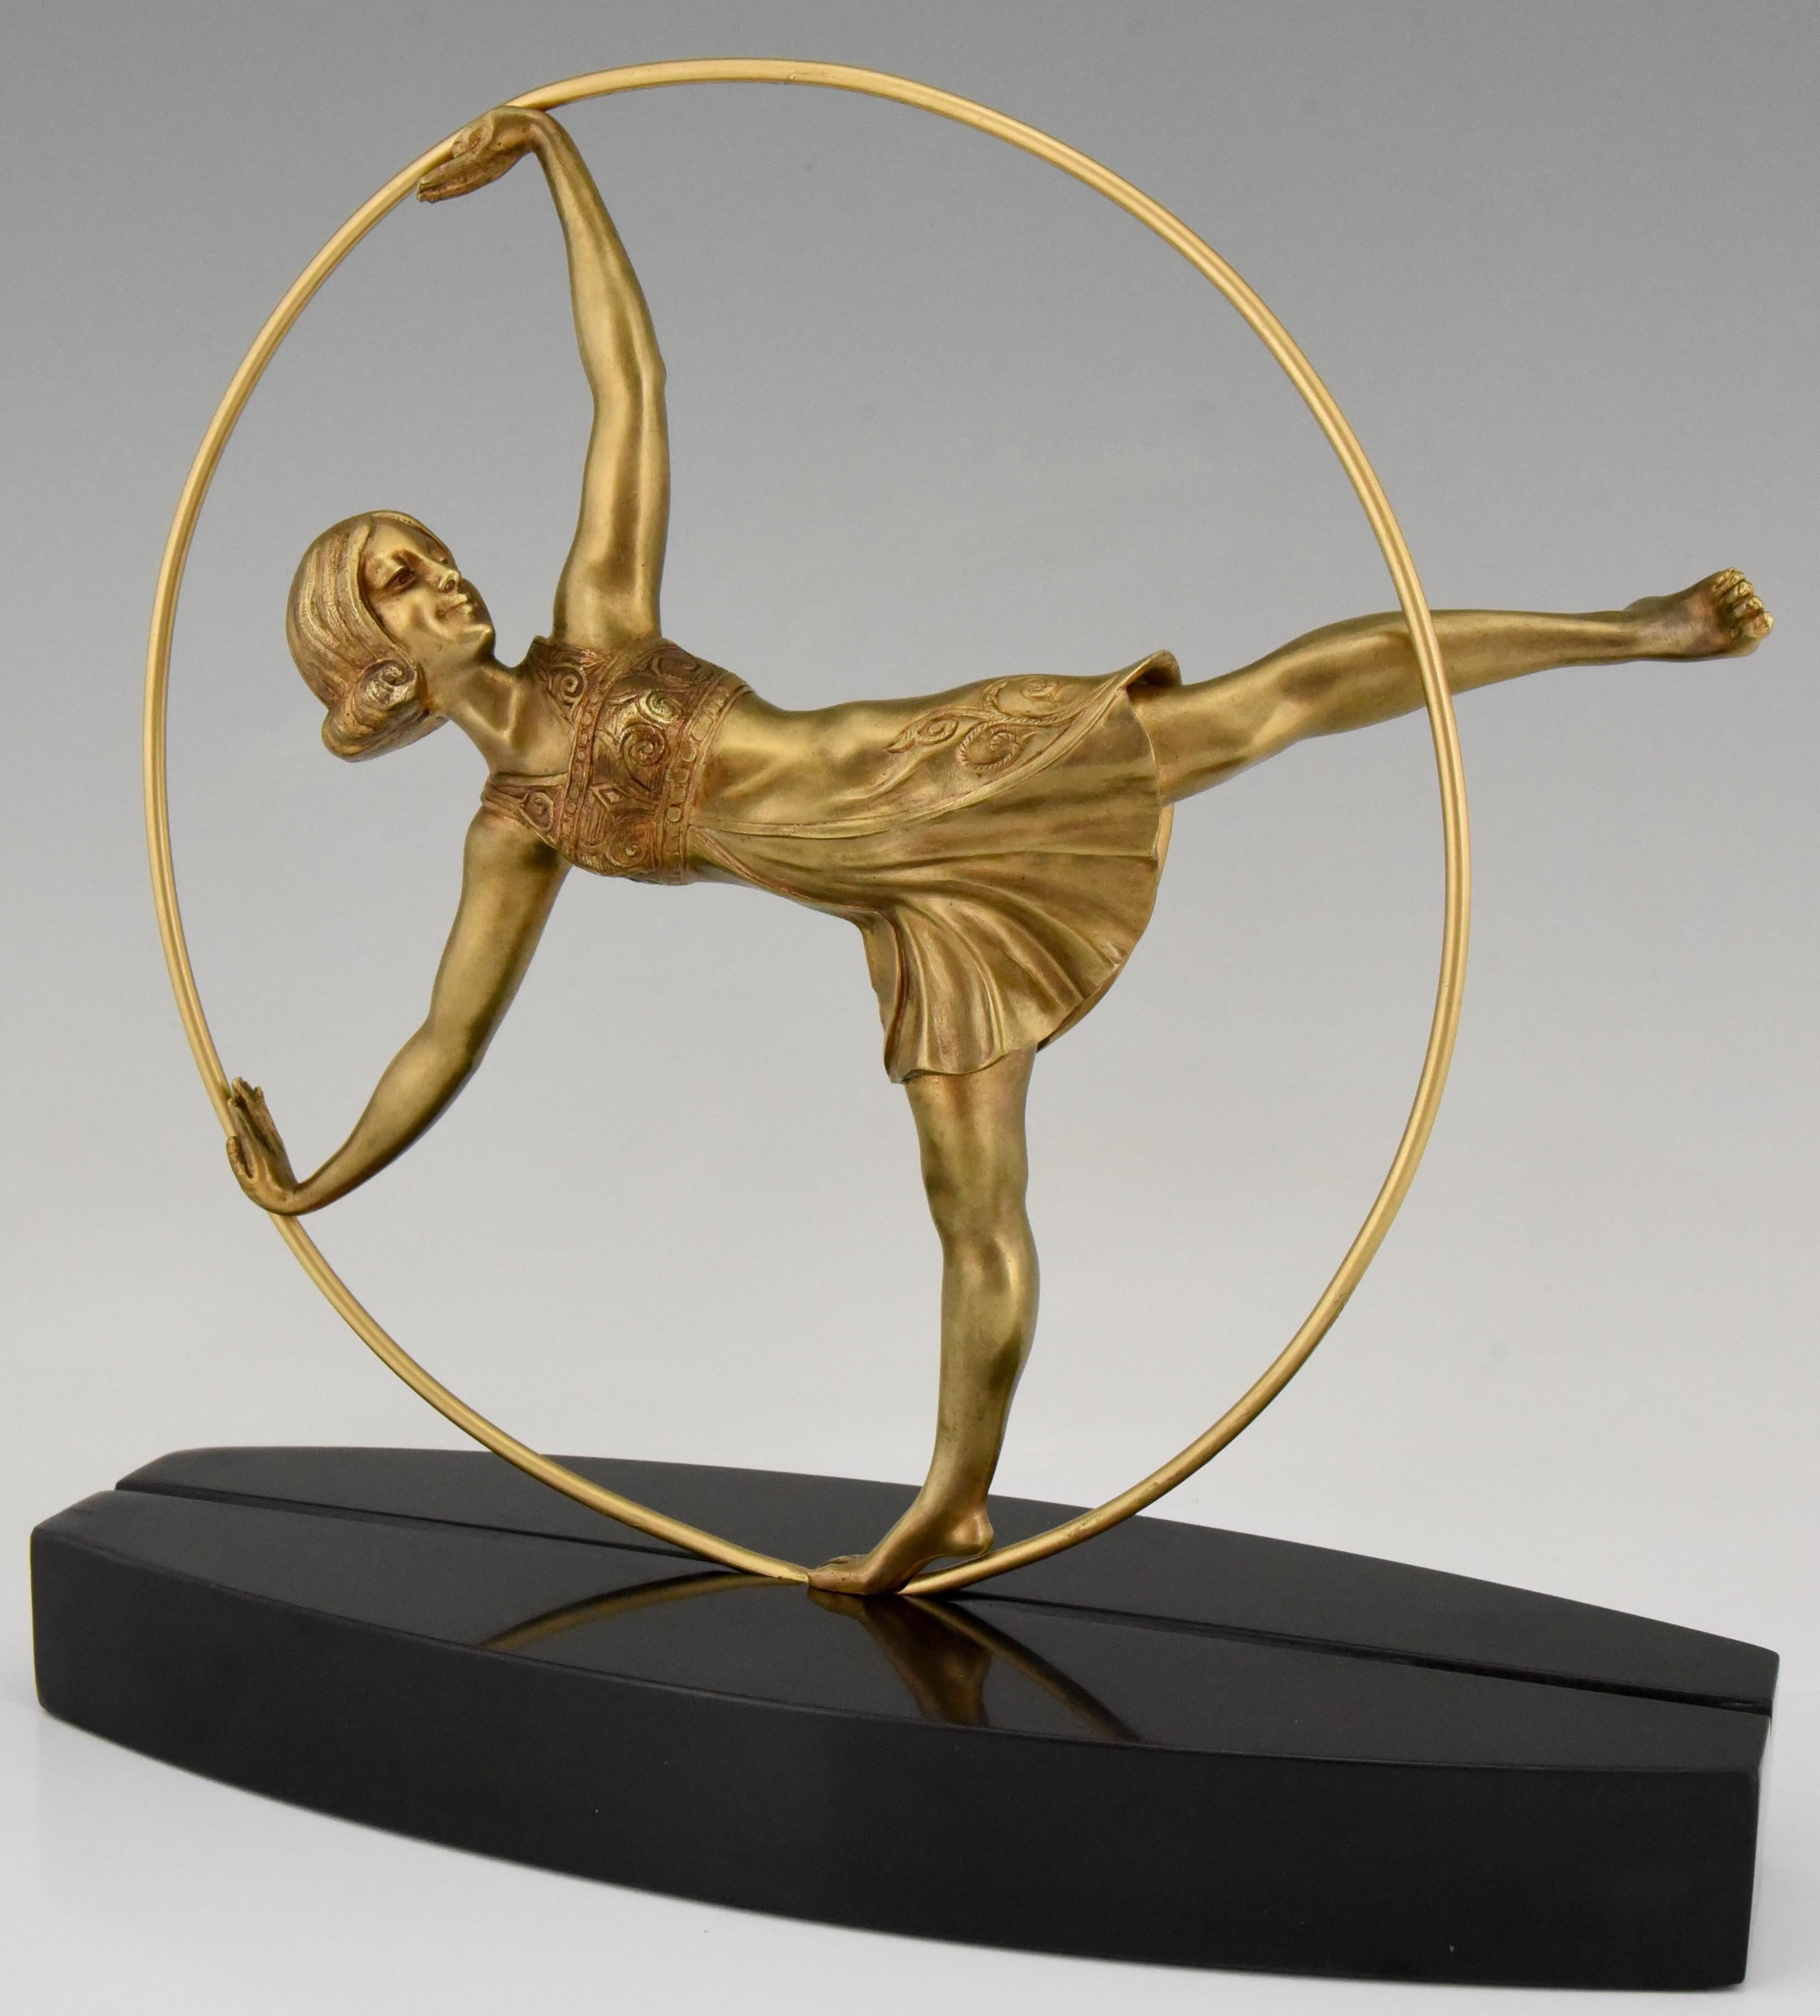 Stylish Art Deco bronze sculpture of a hoop dancer by Samuel Lipchytz.
The bronze sculpture has a gilt patina and stand on an oval Belgian black marble base, France, 1920.
Literature:
The sculpture is illustrated in “Art Deco and other figures”